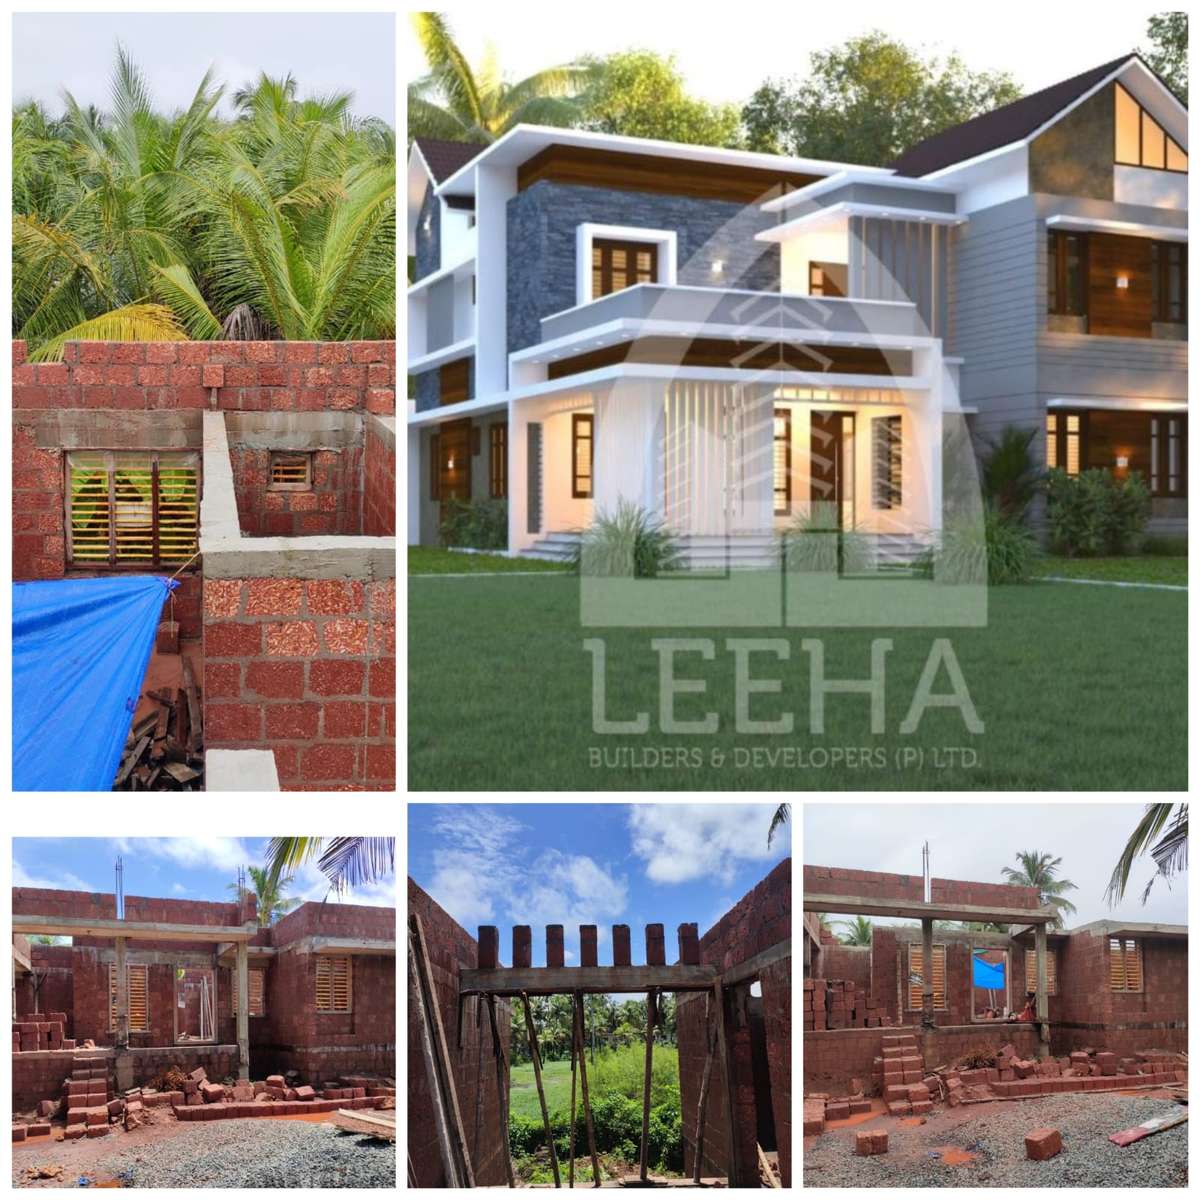 Leeha builders, thana, kannur.
 Specialized in low cost construction. #Foundation#plastering #electricals#plumbing #flooring#painting, all included in (1500-2400/sqft) package.
ðŸ“±7306950091